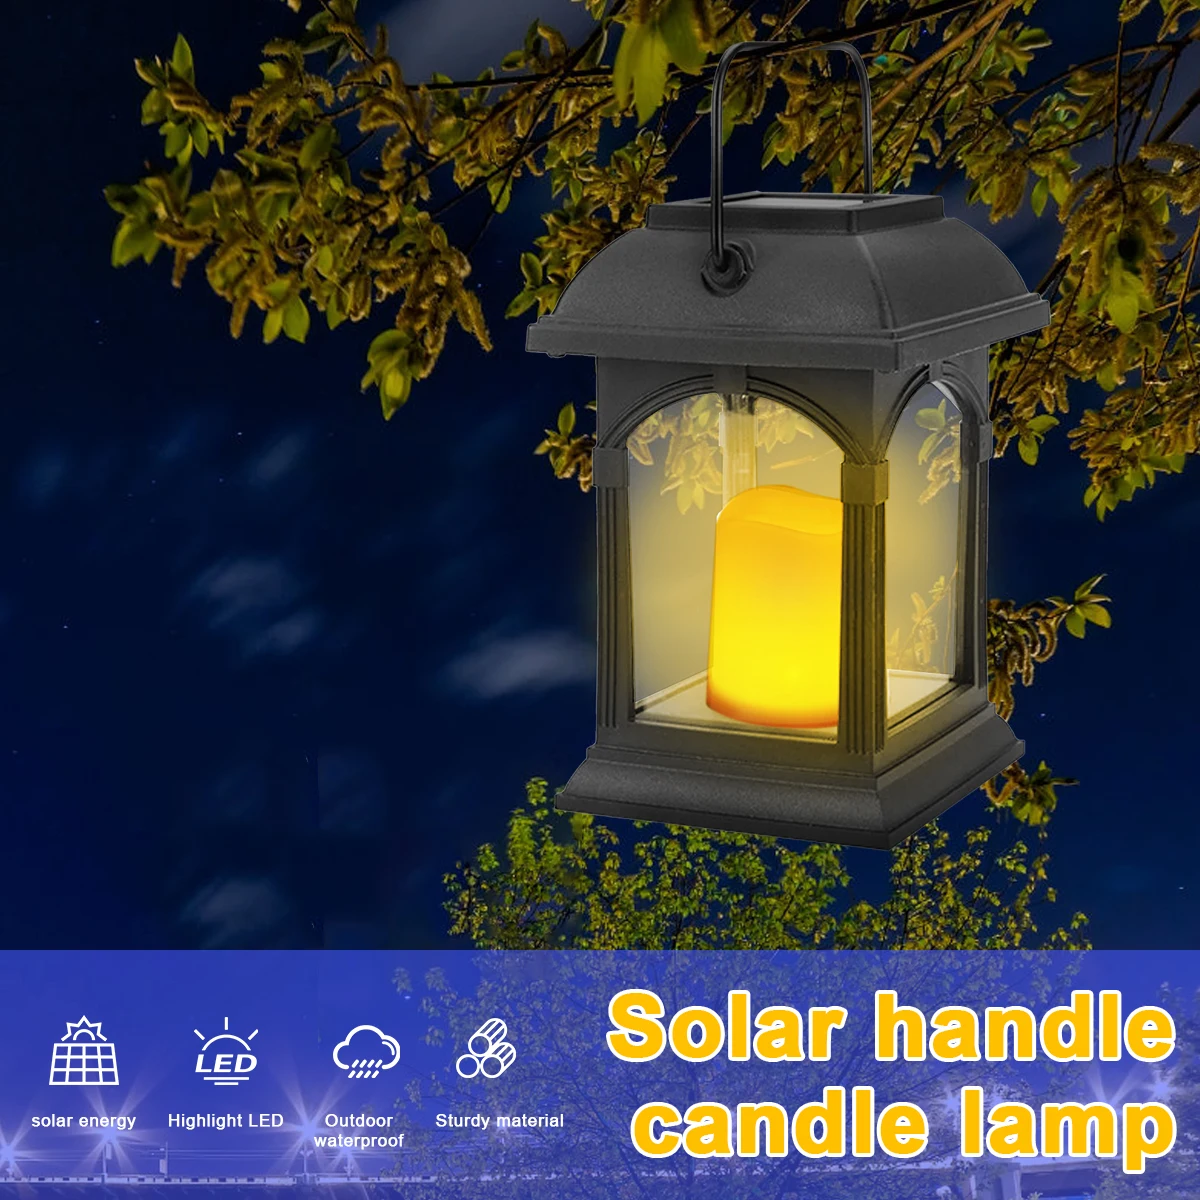 

Solar Handle Candle Lamp Solar Candle Holder Lantern Reusable IP44 Waterproof Hanging LED Light Solar Powered Outdoor Garden